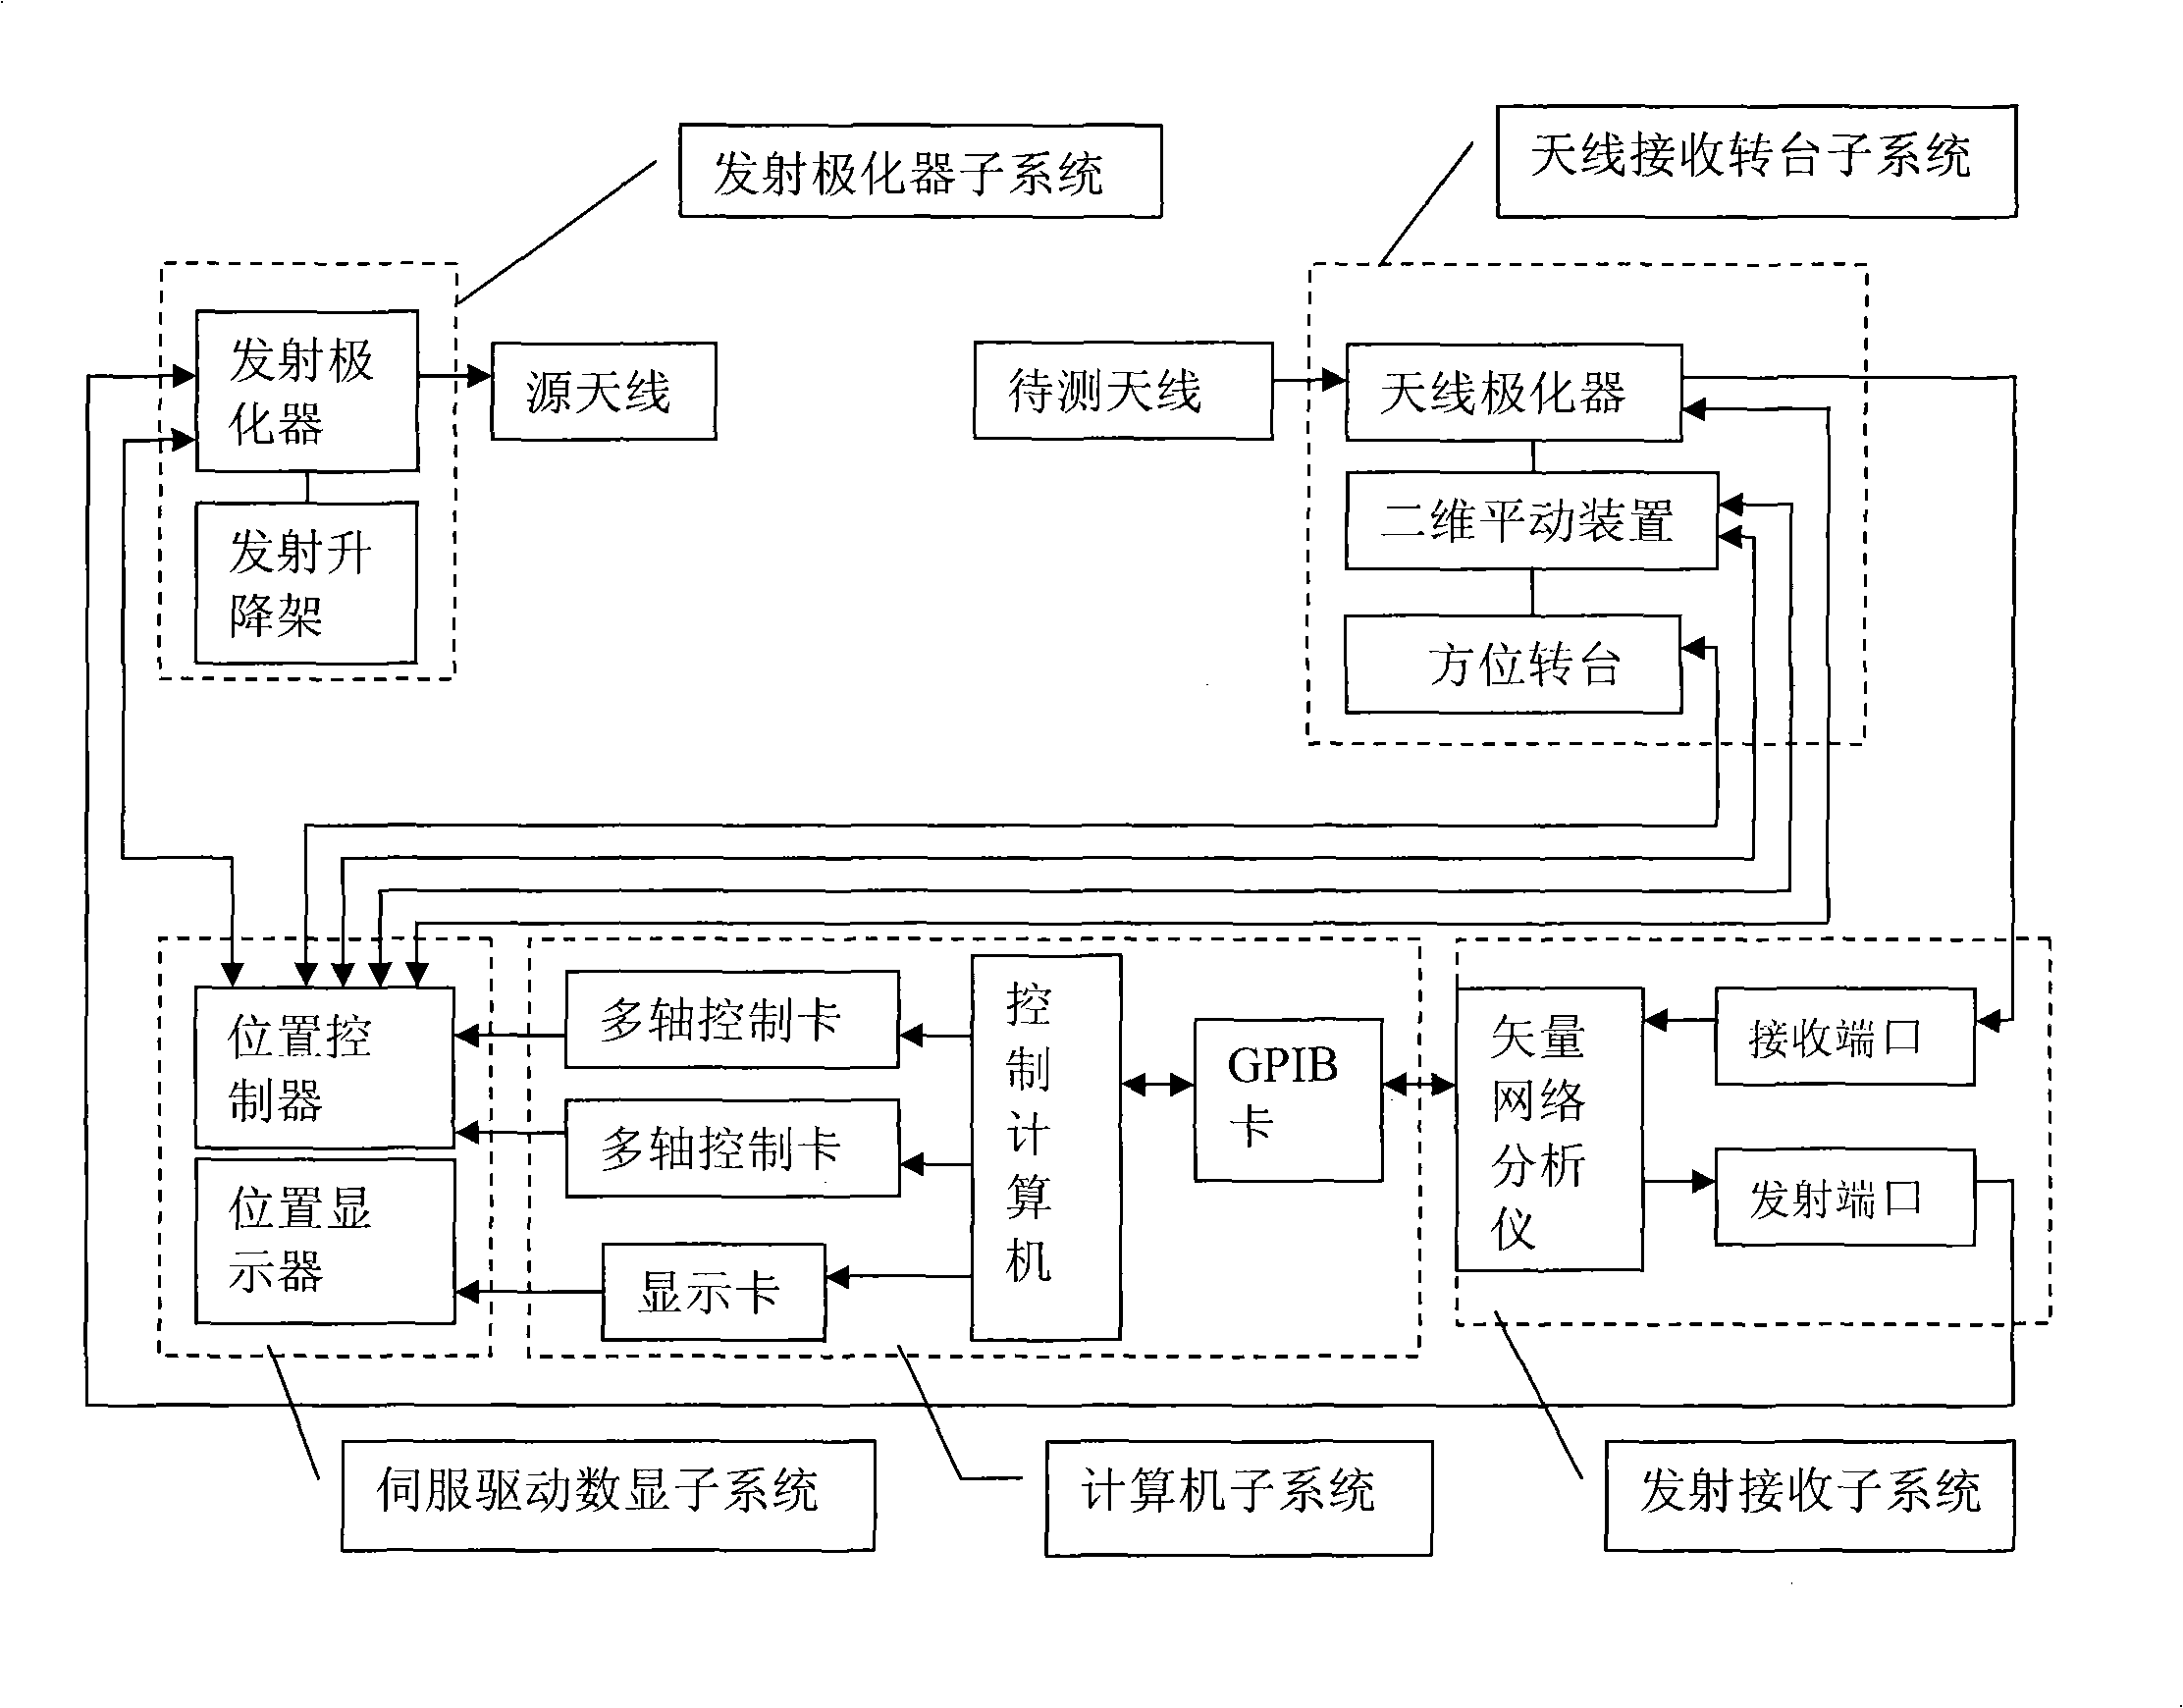 Antenna phase center measuring method based on moving reference point